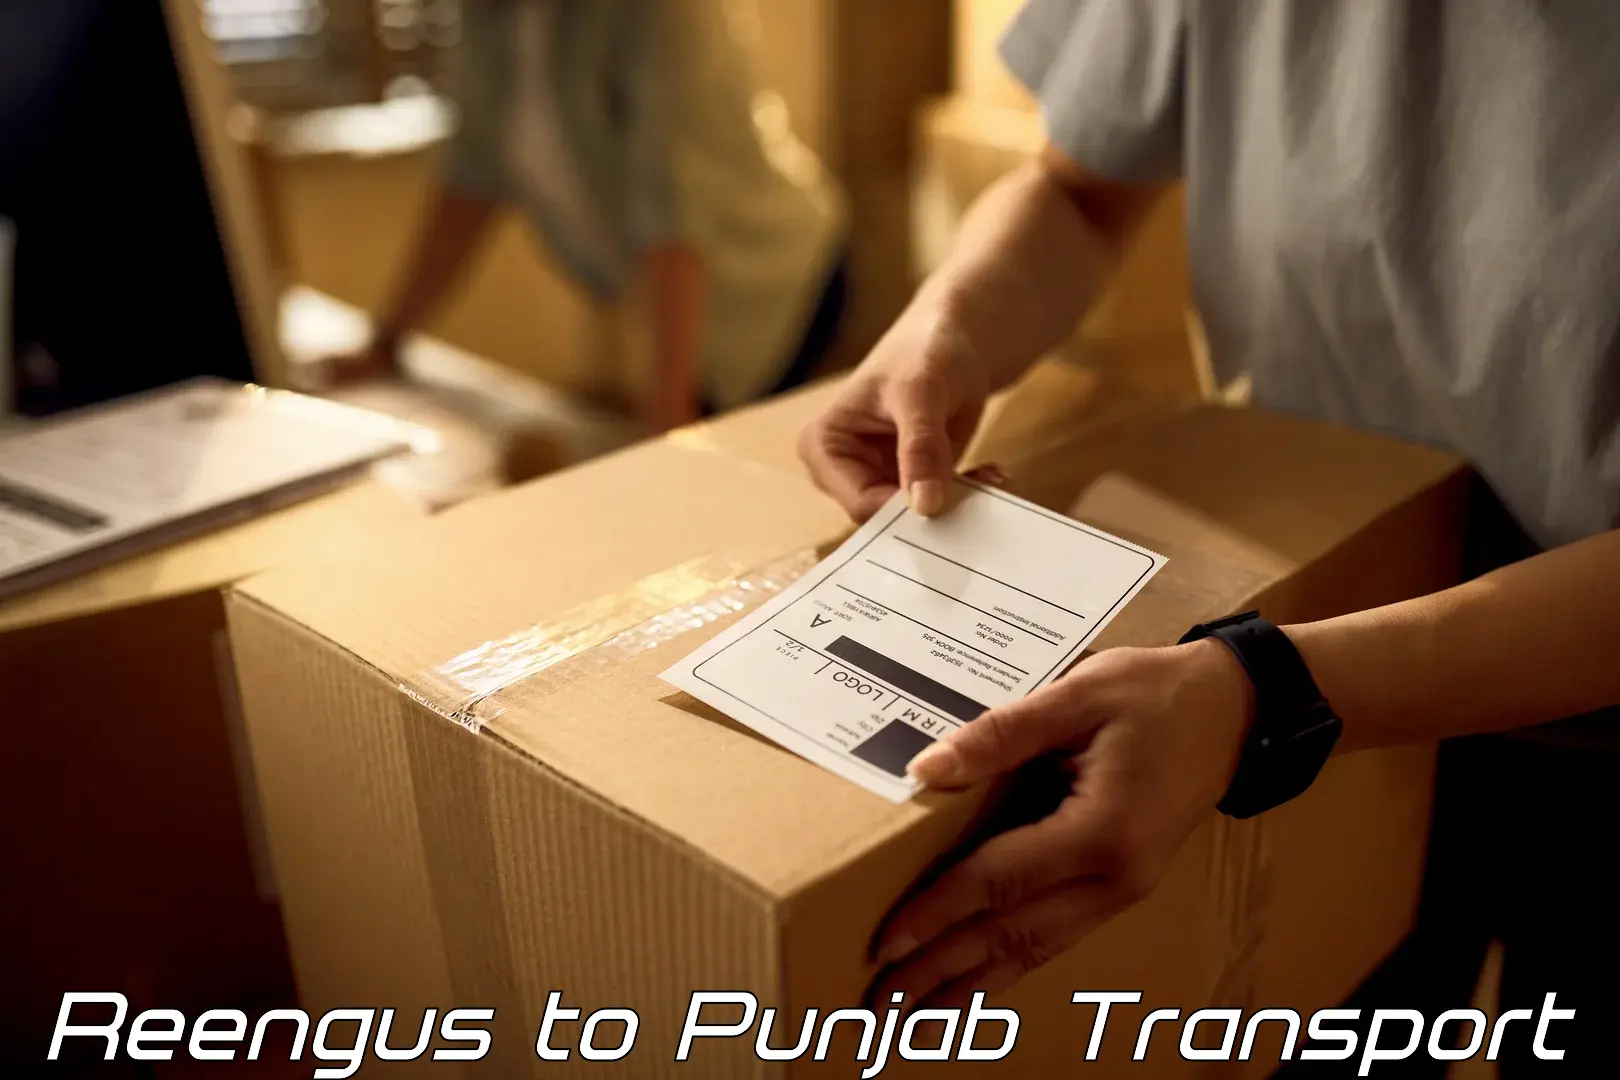 Truck transport companies in India Reengus to Ludhiana